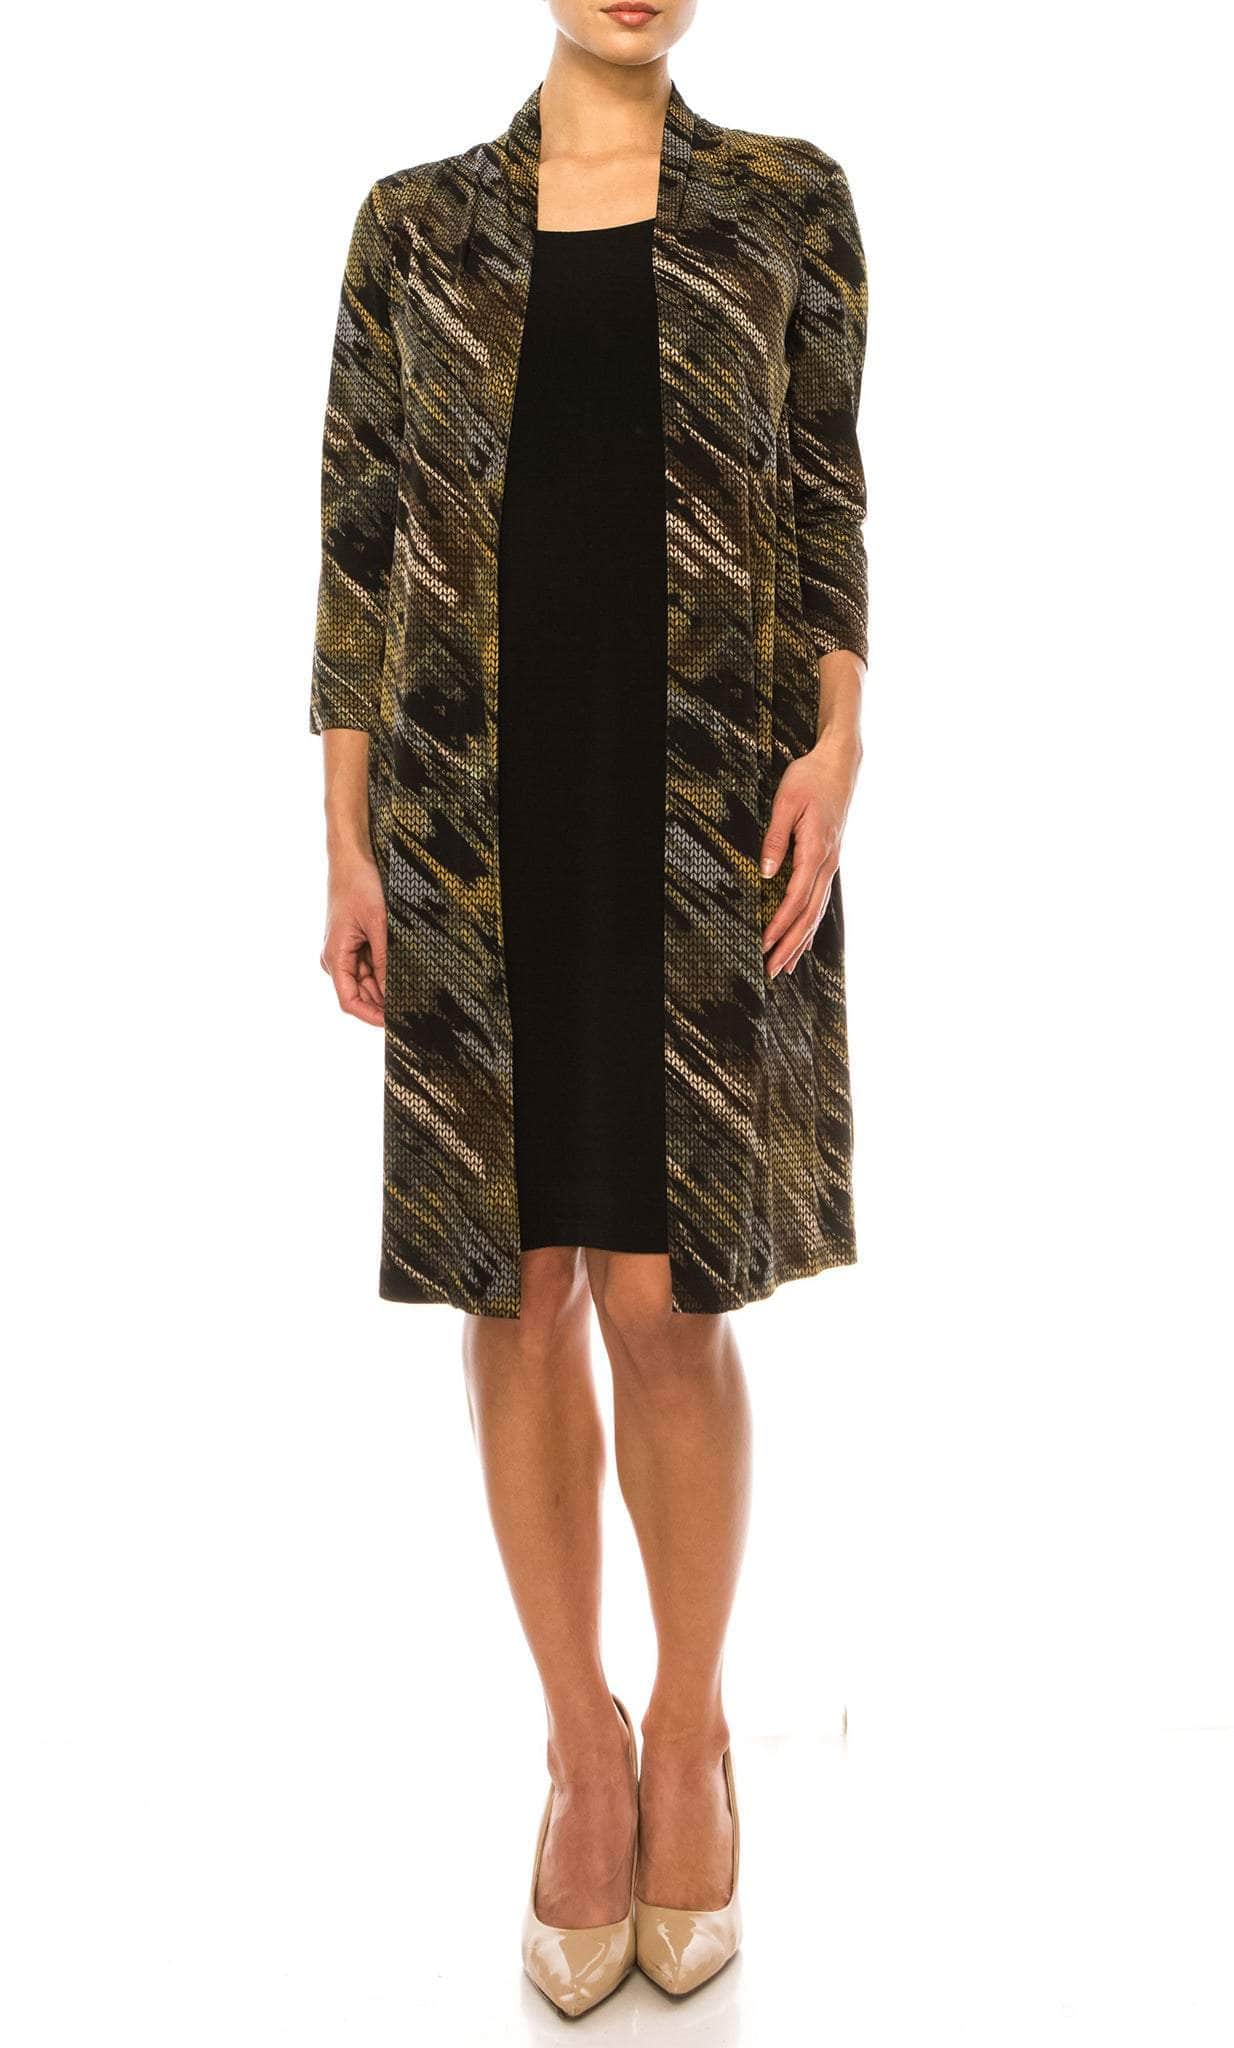 Connected Apparel TGL70975 - Abstract Print Faux Jacket Dress
